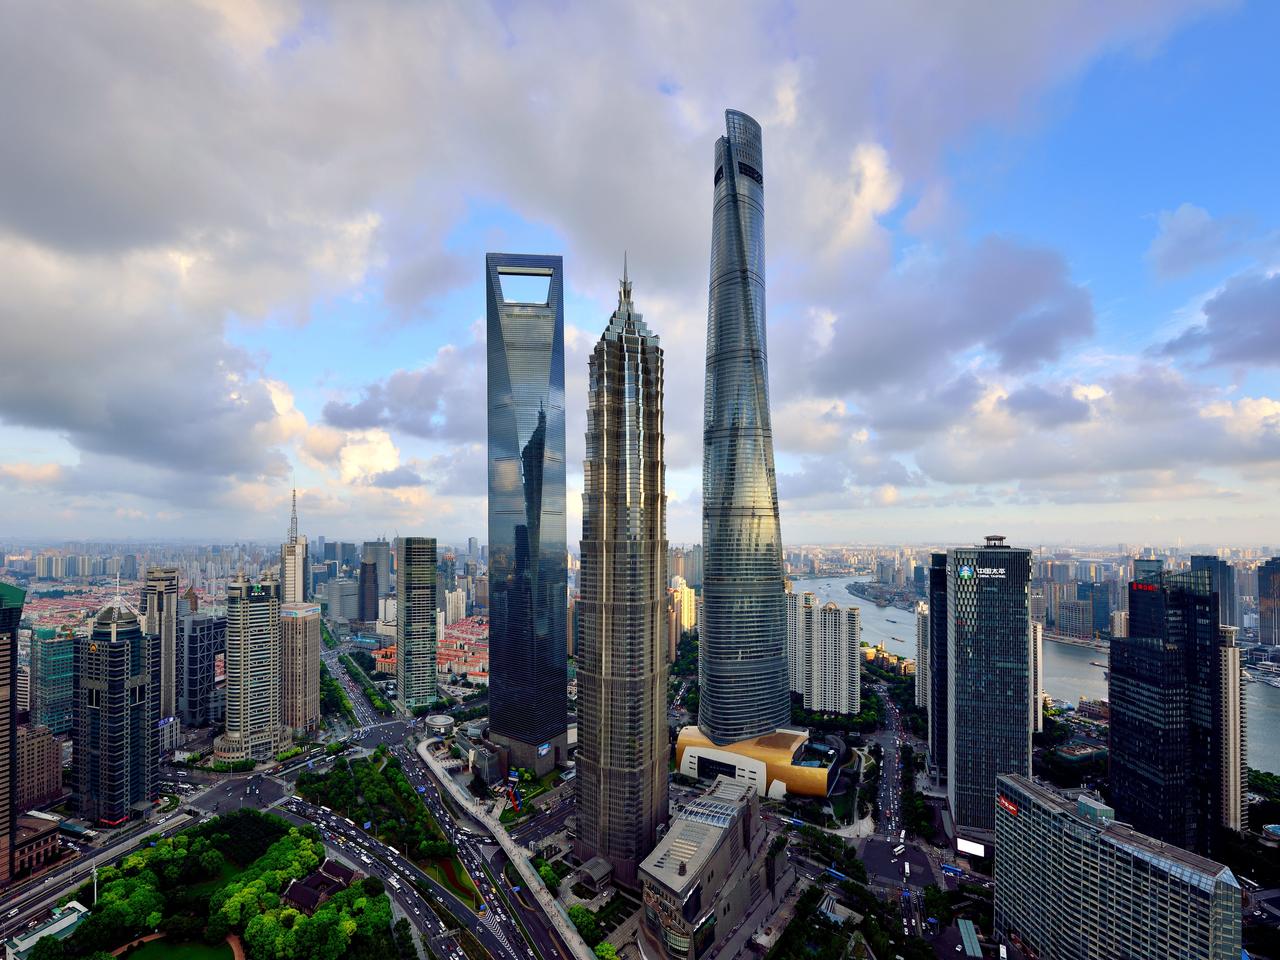 Shanghai Tower, Jin Mao Tower, and Shanghai World Financial Center stand in a cluster in Lujiazui, Shanghai's financial district